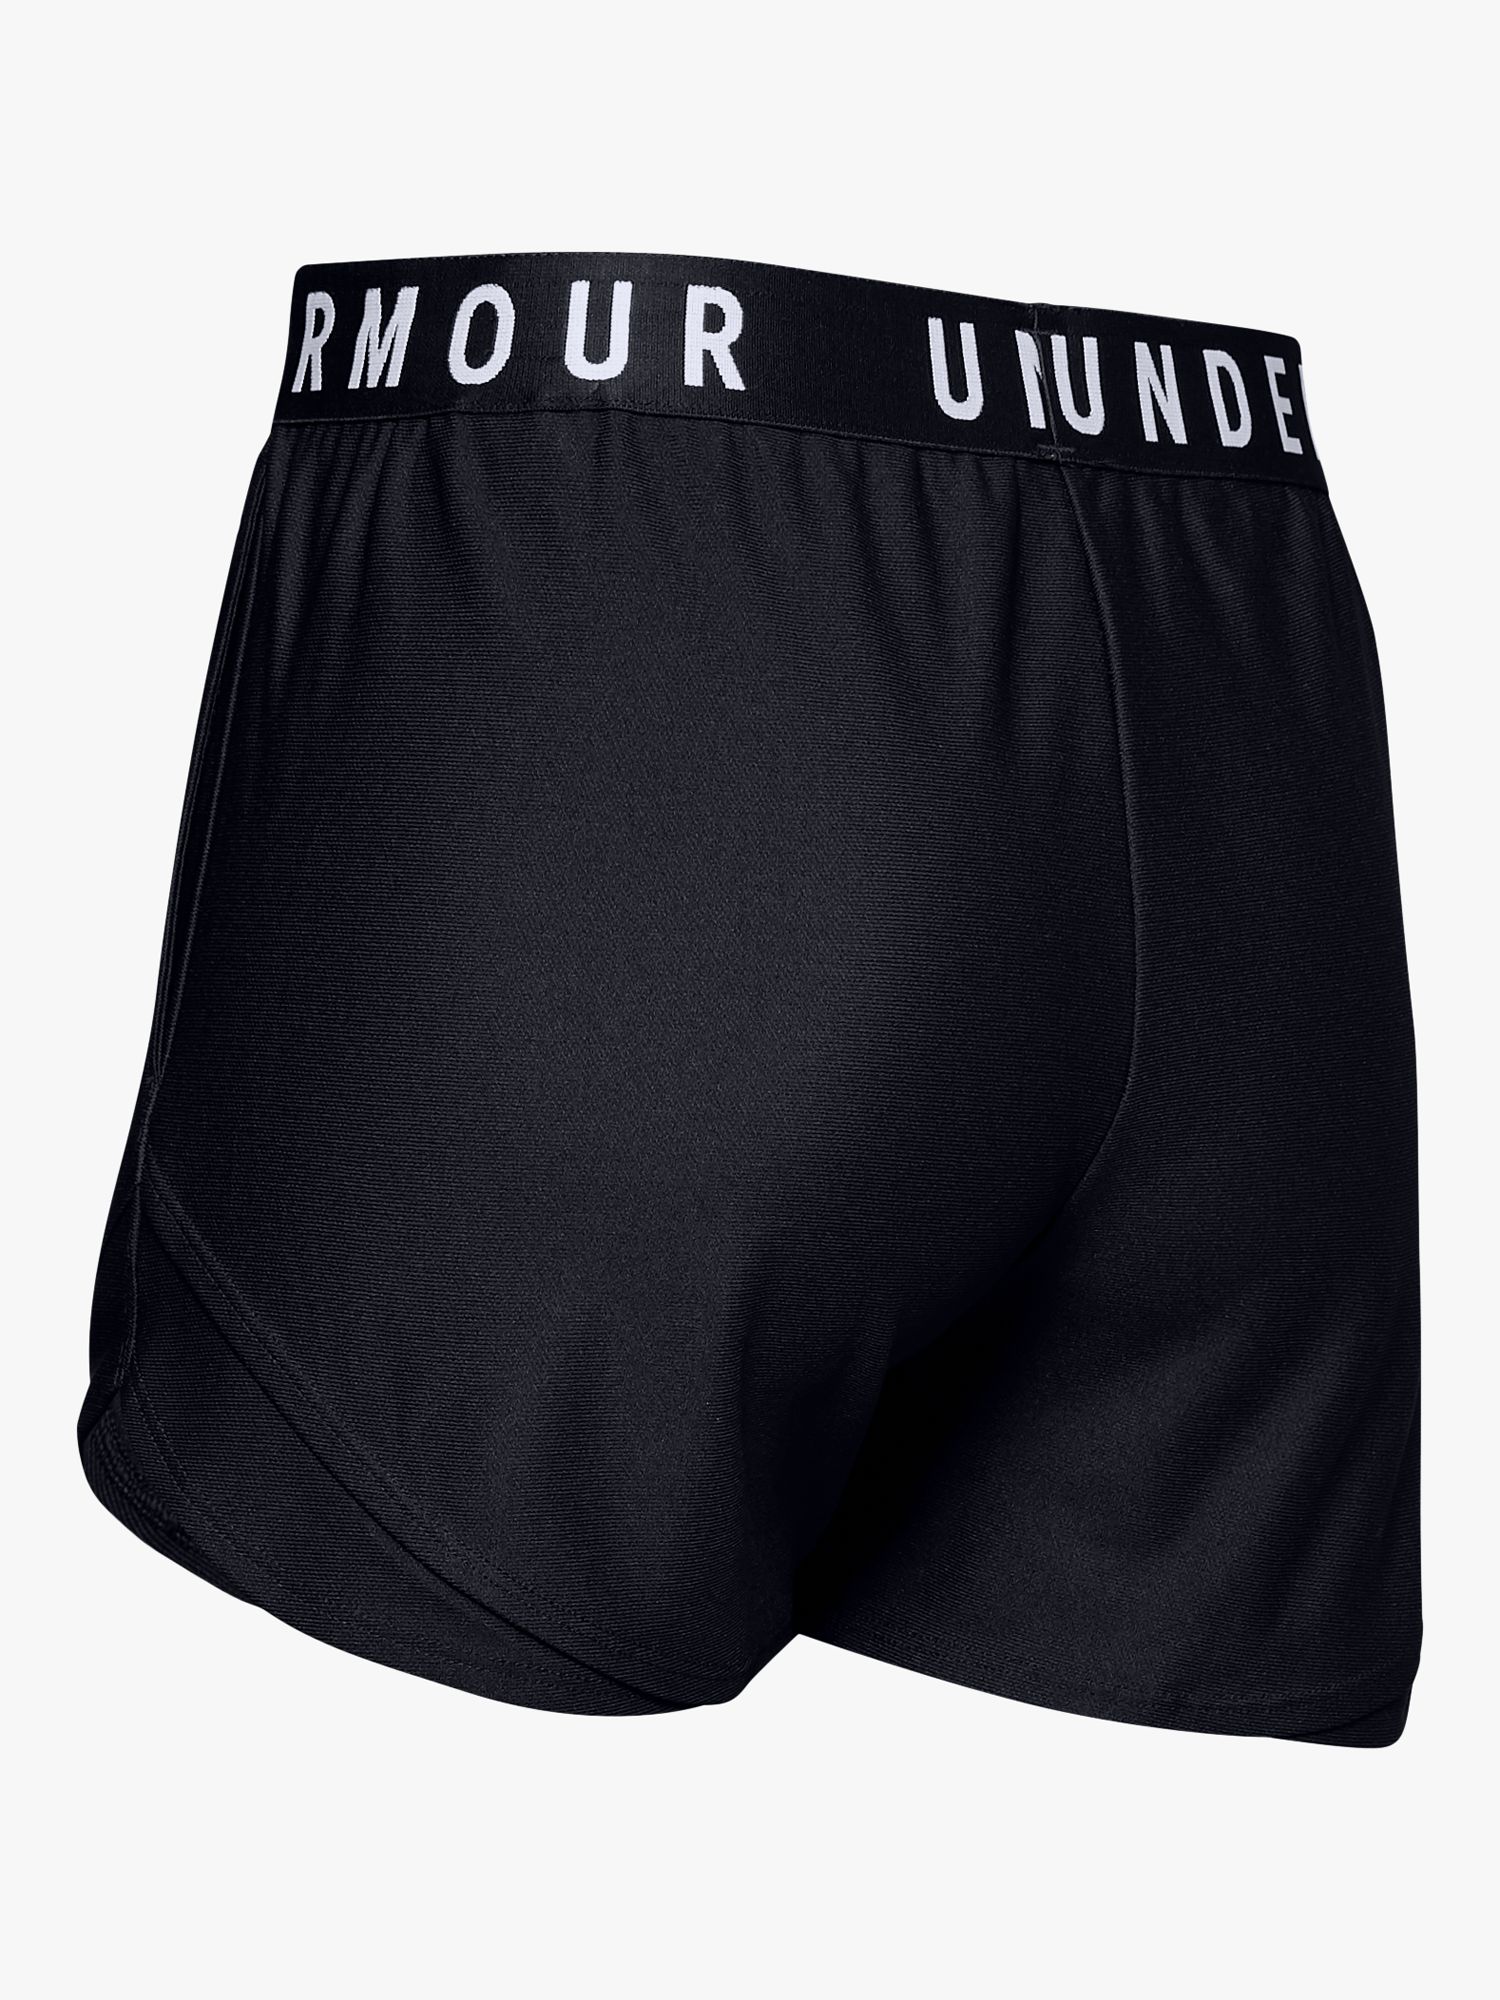 Under Armour Play Up 3.0 Training Shorts, Black/White, XS